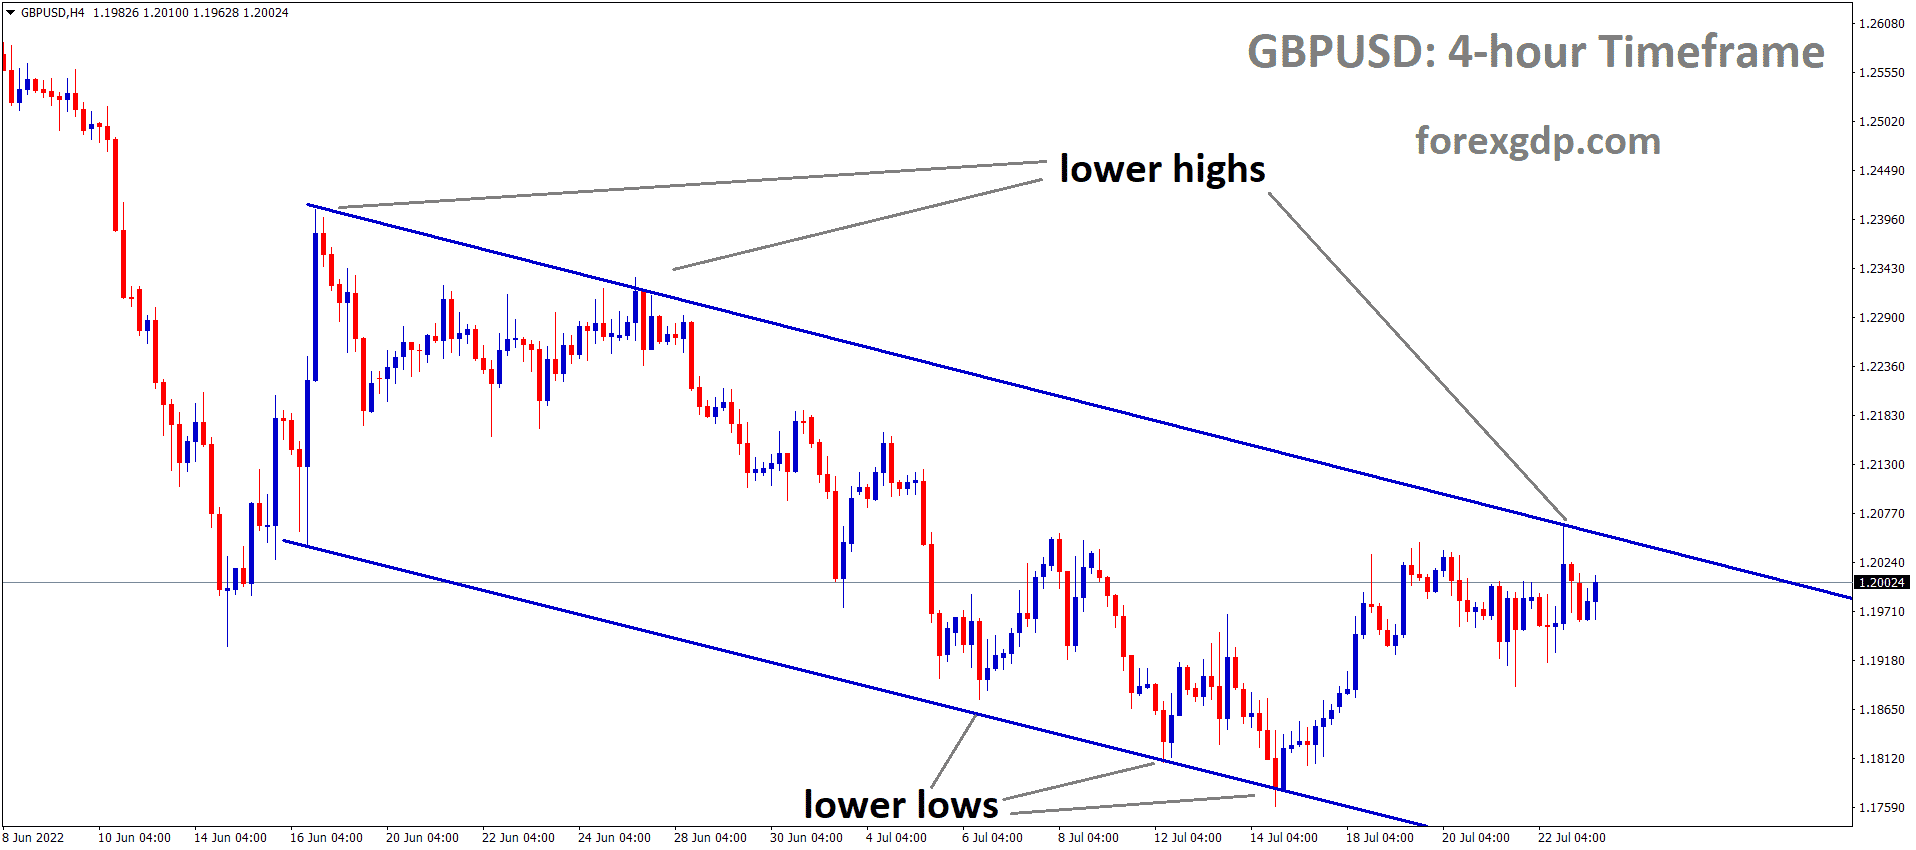 GBPUSD H4 TF analysis Market is moving in the Descending channel and the Market has reached the Lower high area of the channel